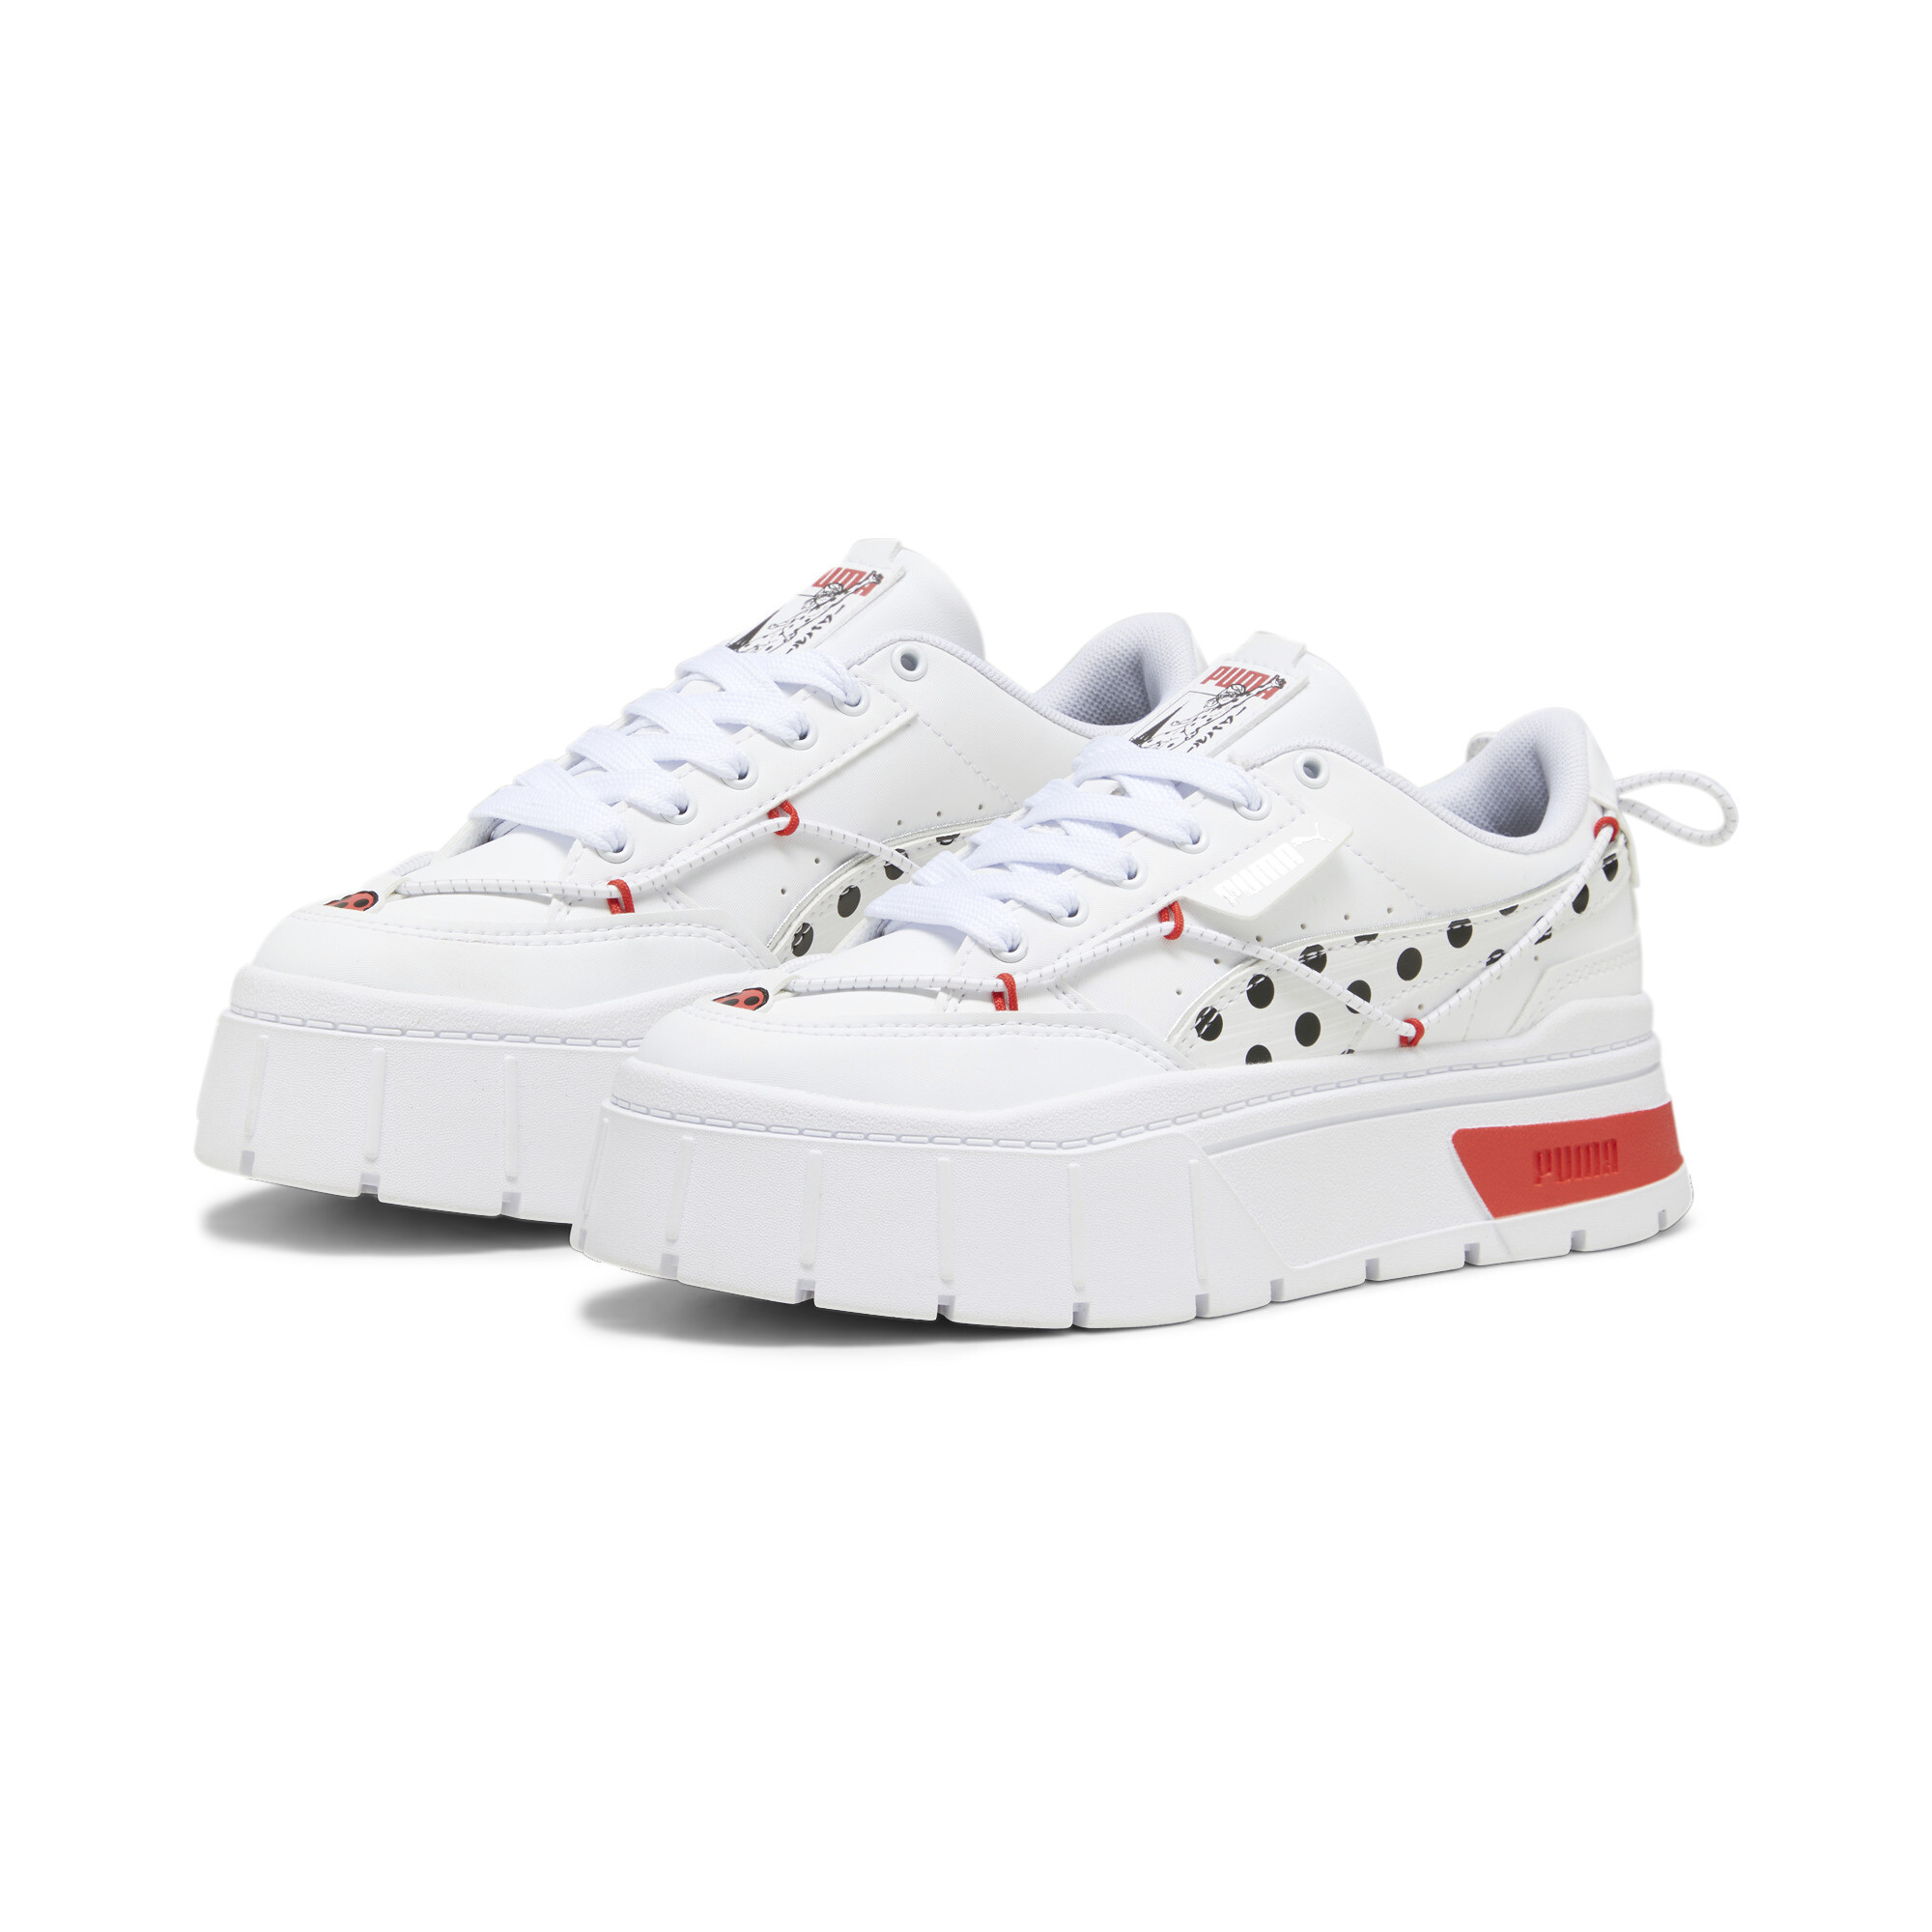 PUMA X MIRACULOUS Mayze Stack Youth Sneakers In White, Size EU 38